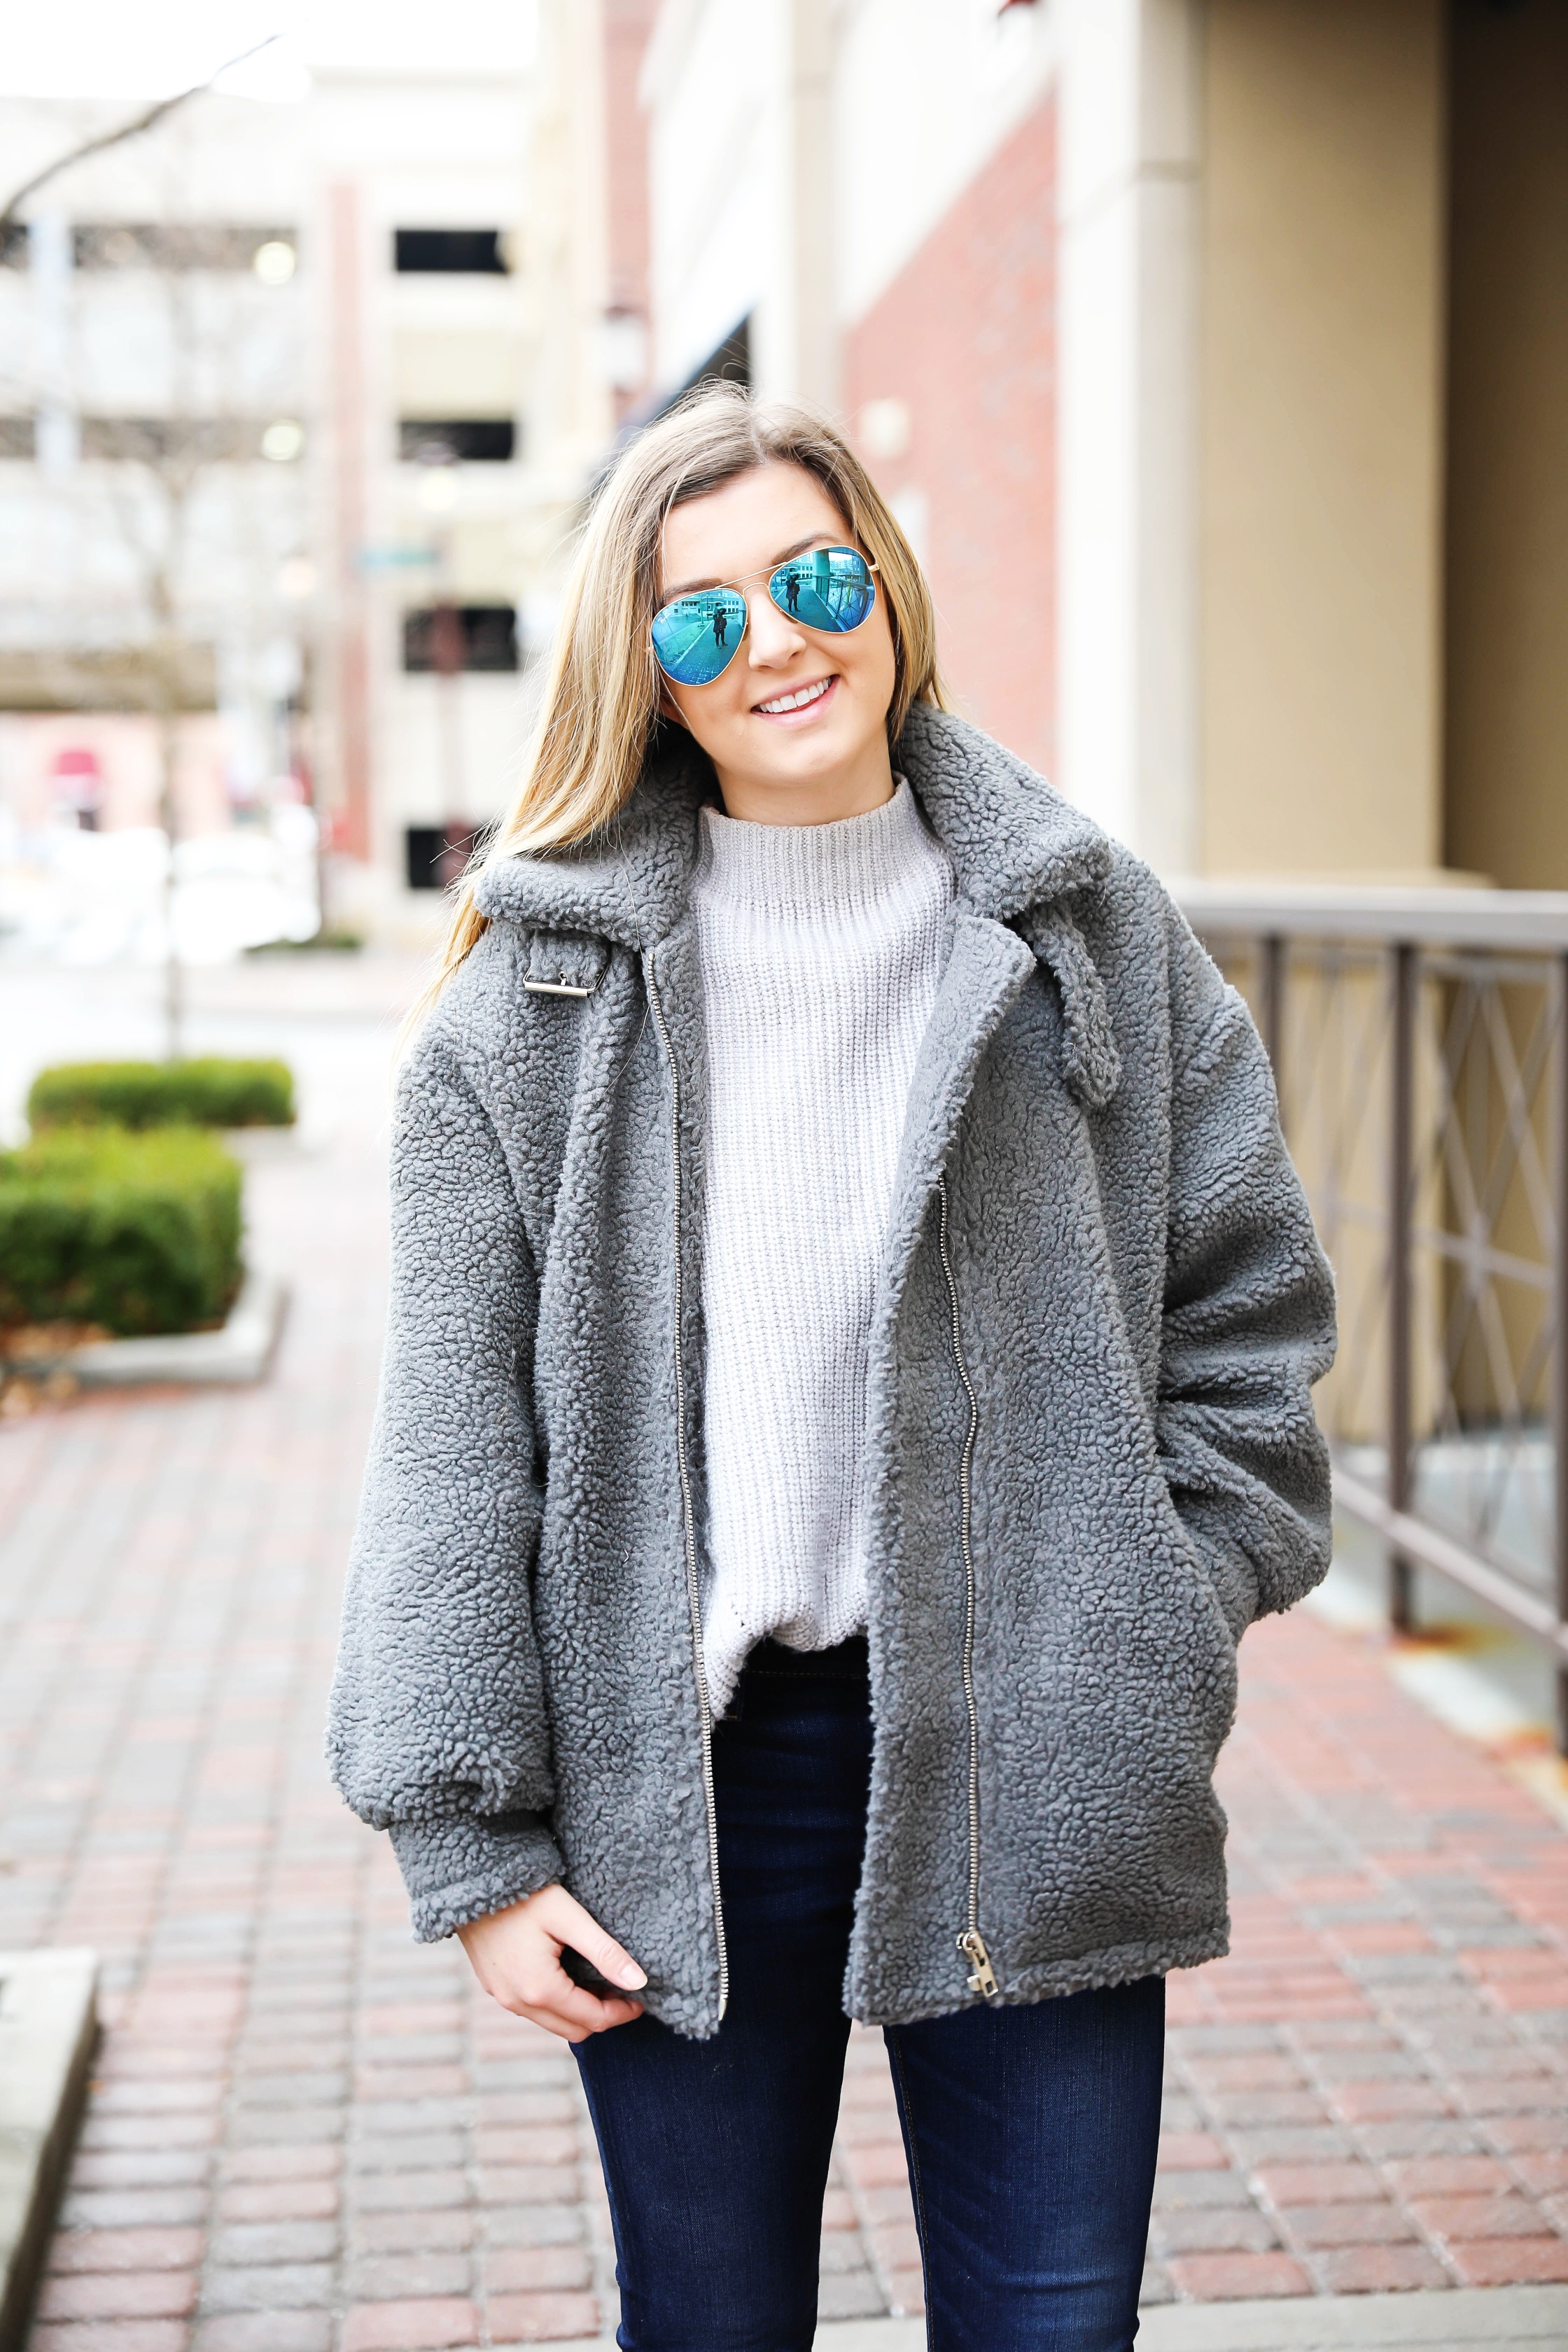 Fuzzy grey aviator coat! Paired this soft jacket with my favorite ray ban blue mirrored aviators! Details on fashion blog daily dose of charm by lauren lindmark